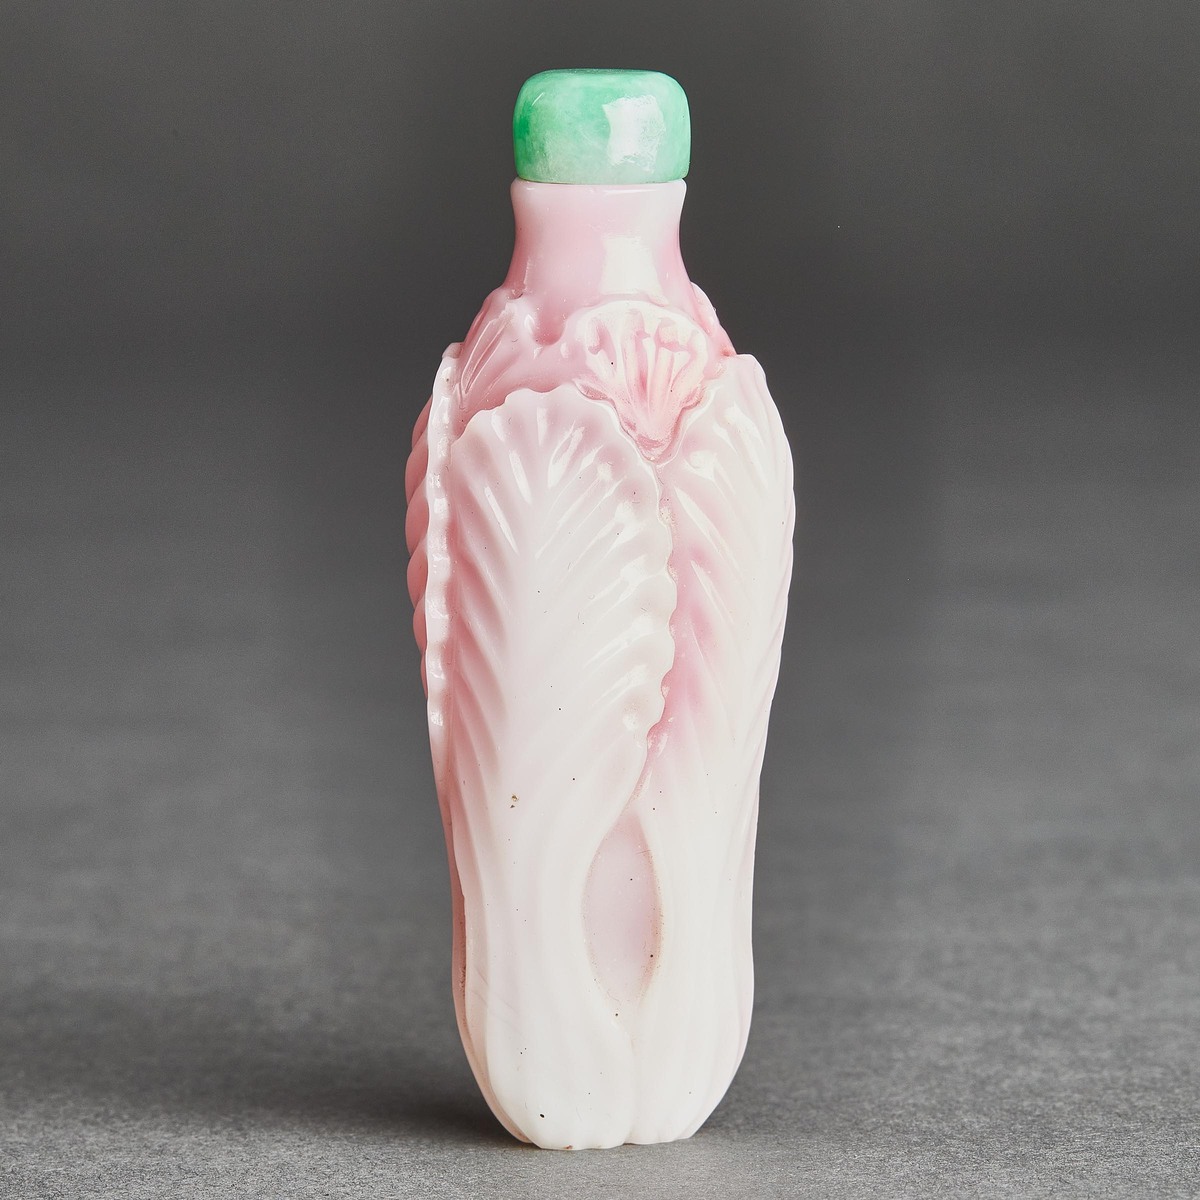 Attributed to Palace Workshops, A Sandwiched Pink Glass 'Cabbage' Snuff Bottle, 1750-1830, 清 十八/十九世紀